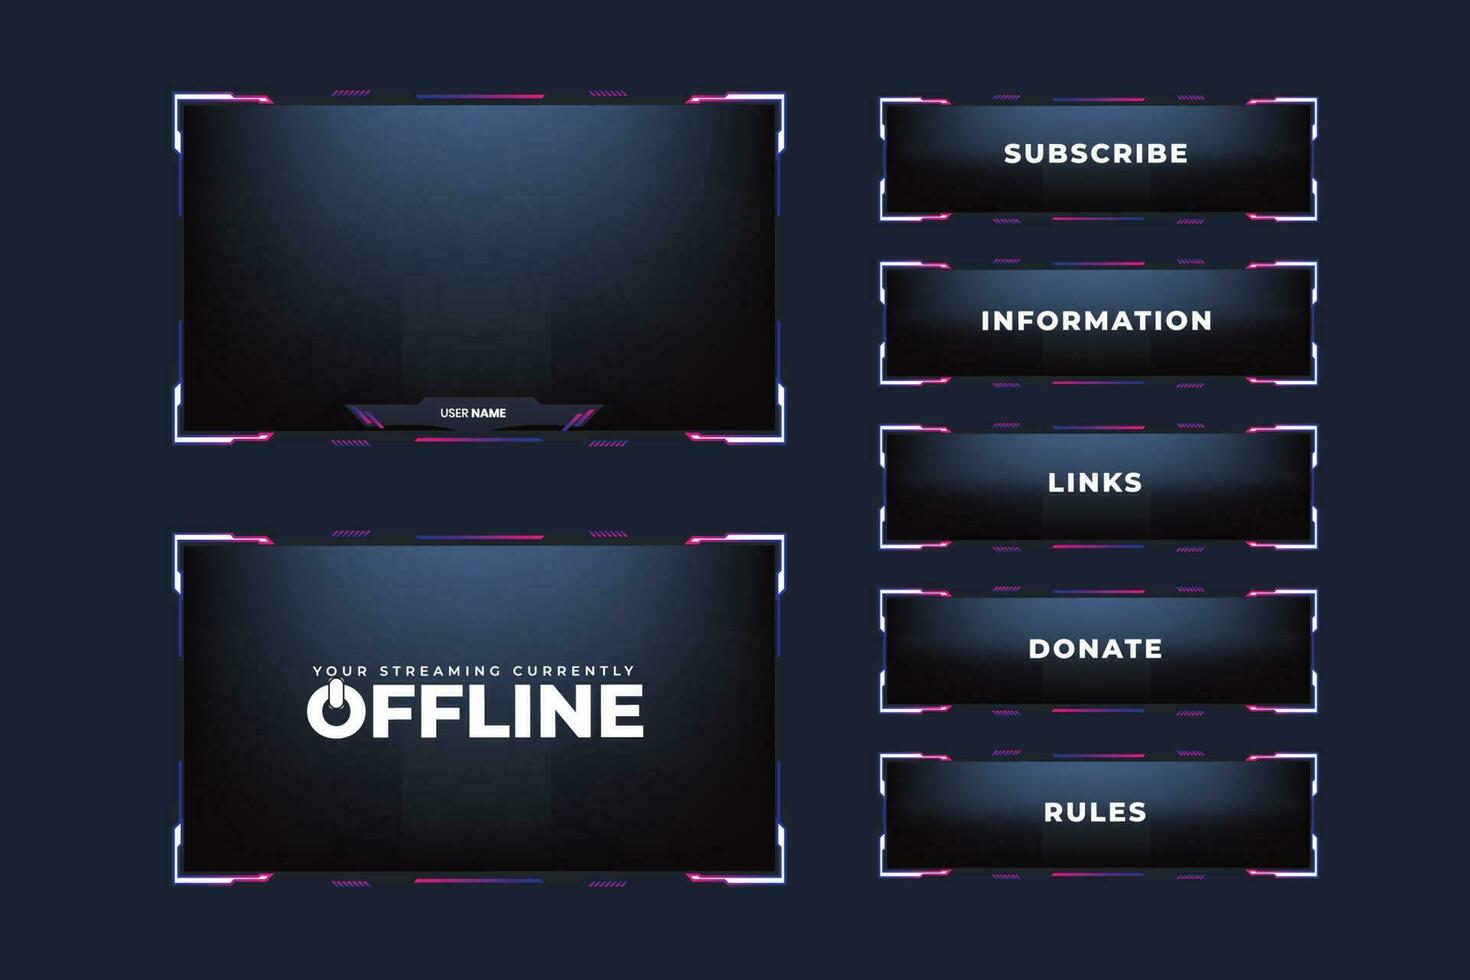 Futuristic gaming frame border design with online and offline screens. Modern gaming overlay layout vector for streamers. Live streaming overlay template design with simple shapes and buttons.